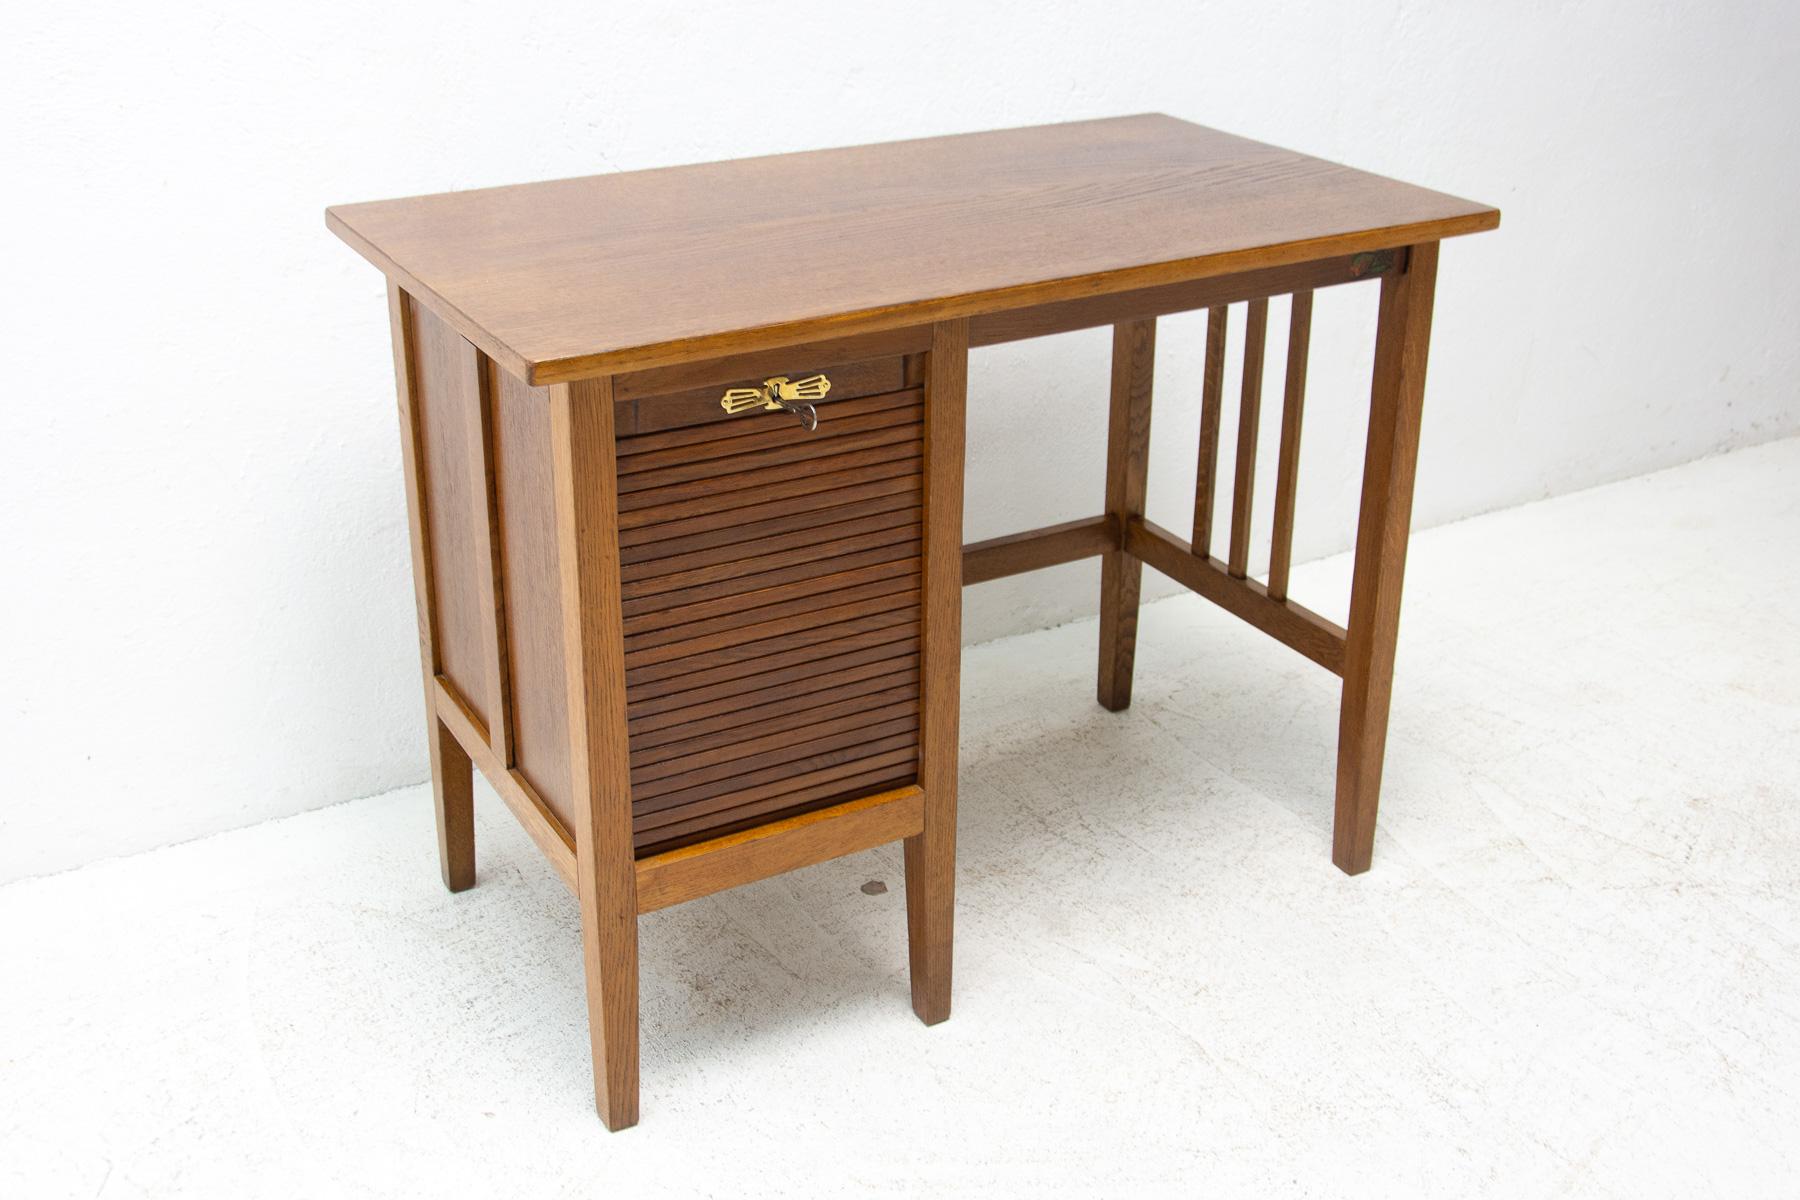 Czech Antique Roller Blind Writing Desk Jerry, 1930s, Bohemia For Sale